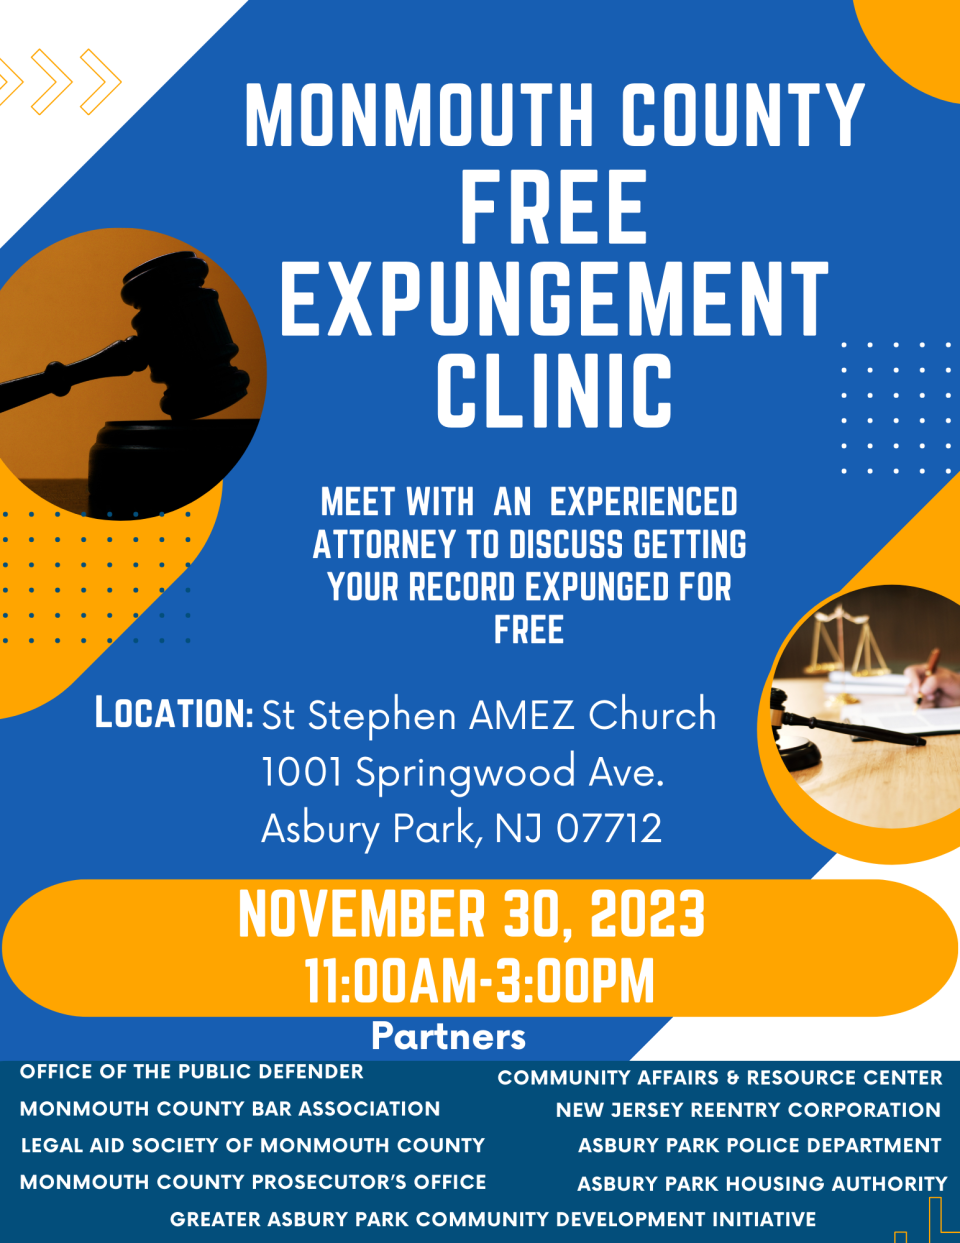 Flyer for the Monmouth County Free Expungement Clinic on November 30 in Asbury Park.